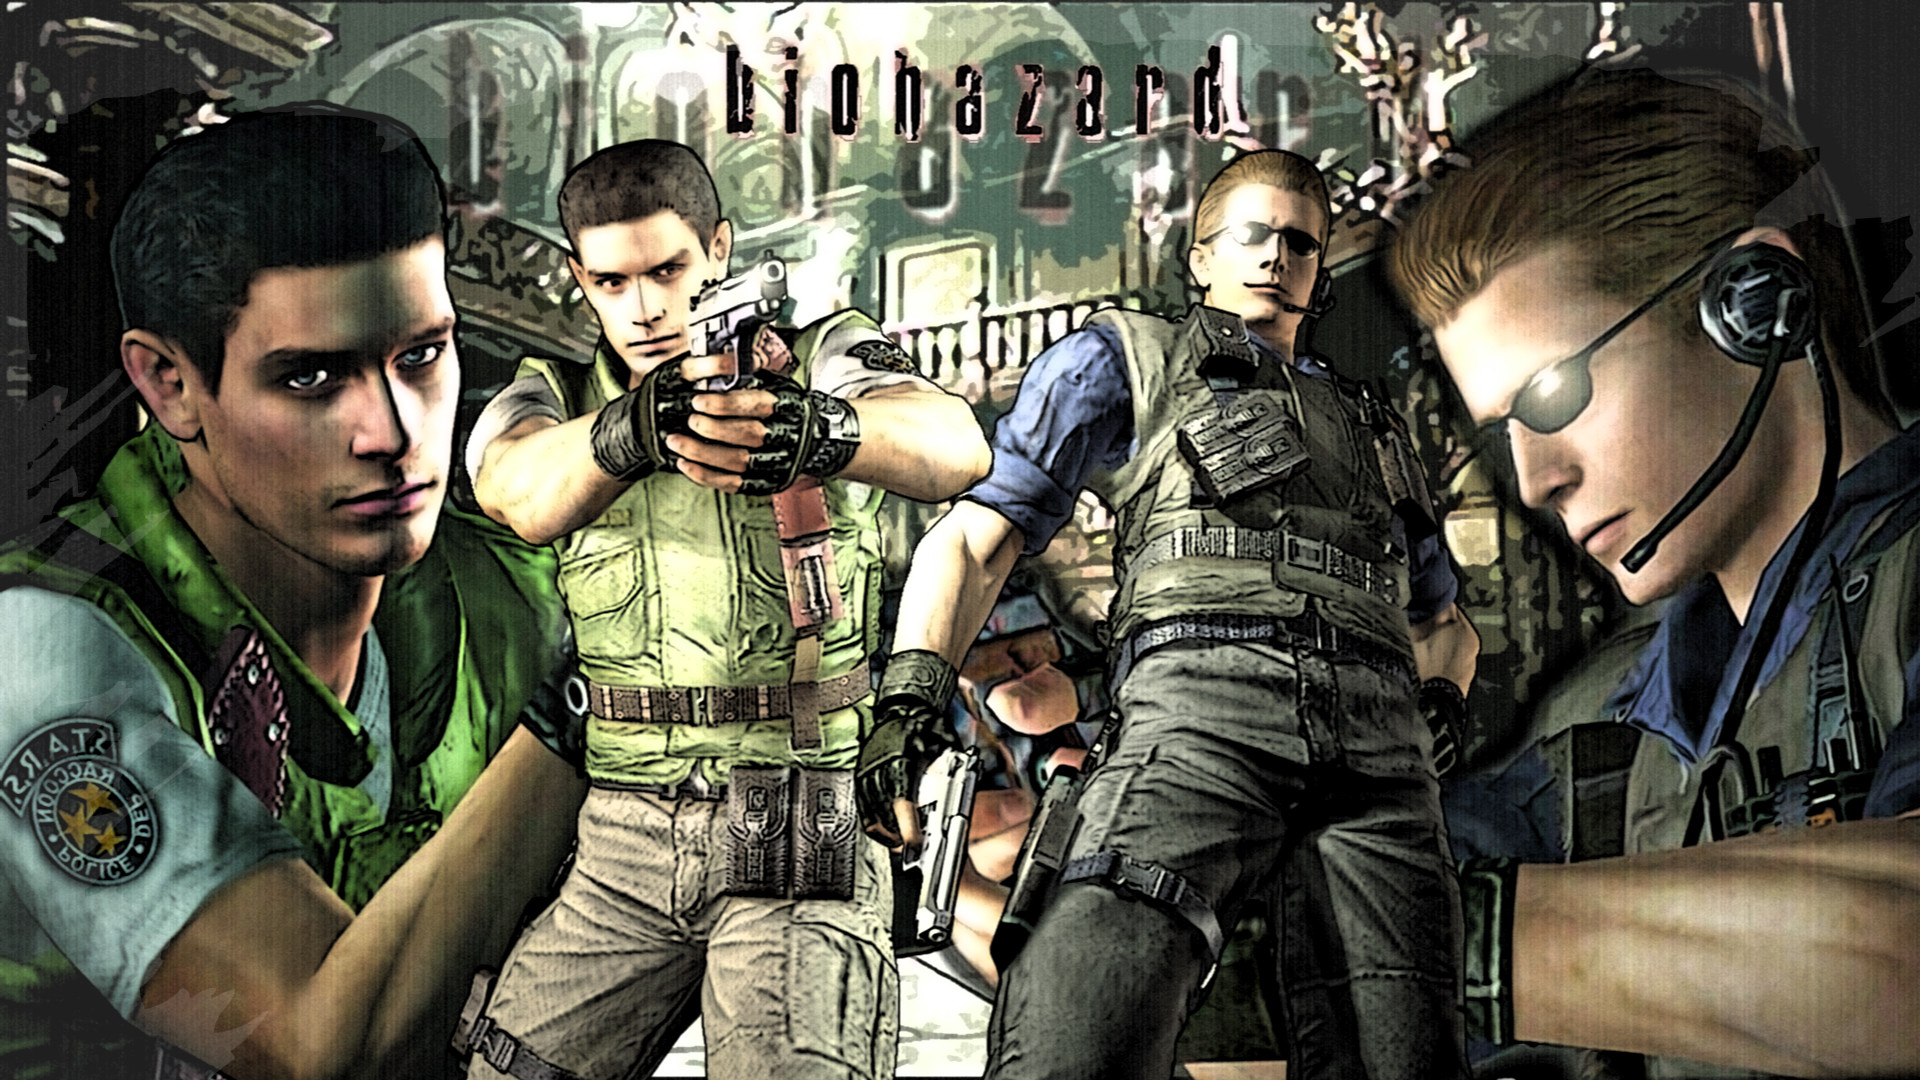 1920x1080 S.T.A.R.S. Wesker and Chris by MusashiChan69 S.T.A.R.S. Wesker and Chris by  MusashiChan69